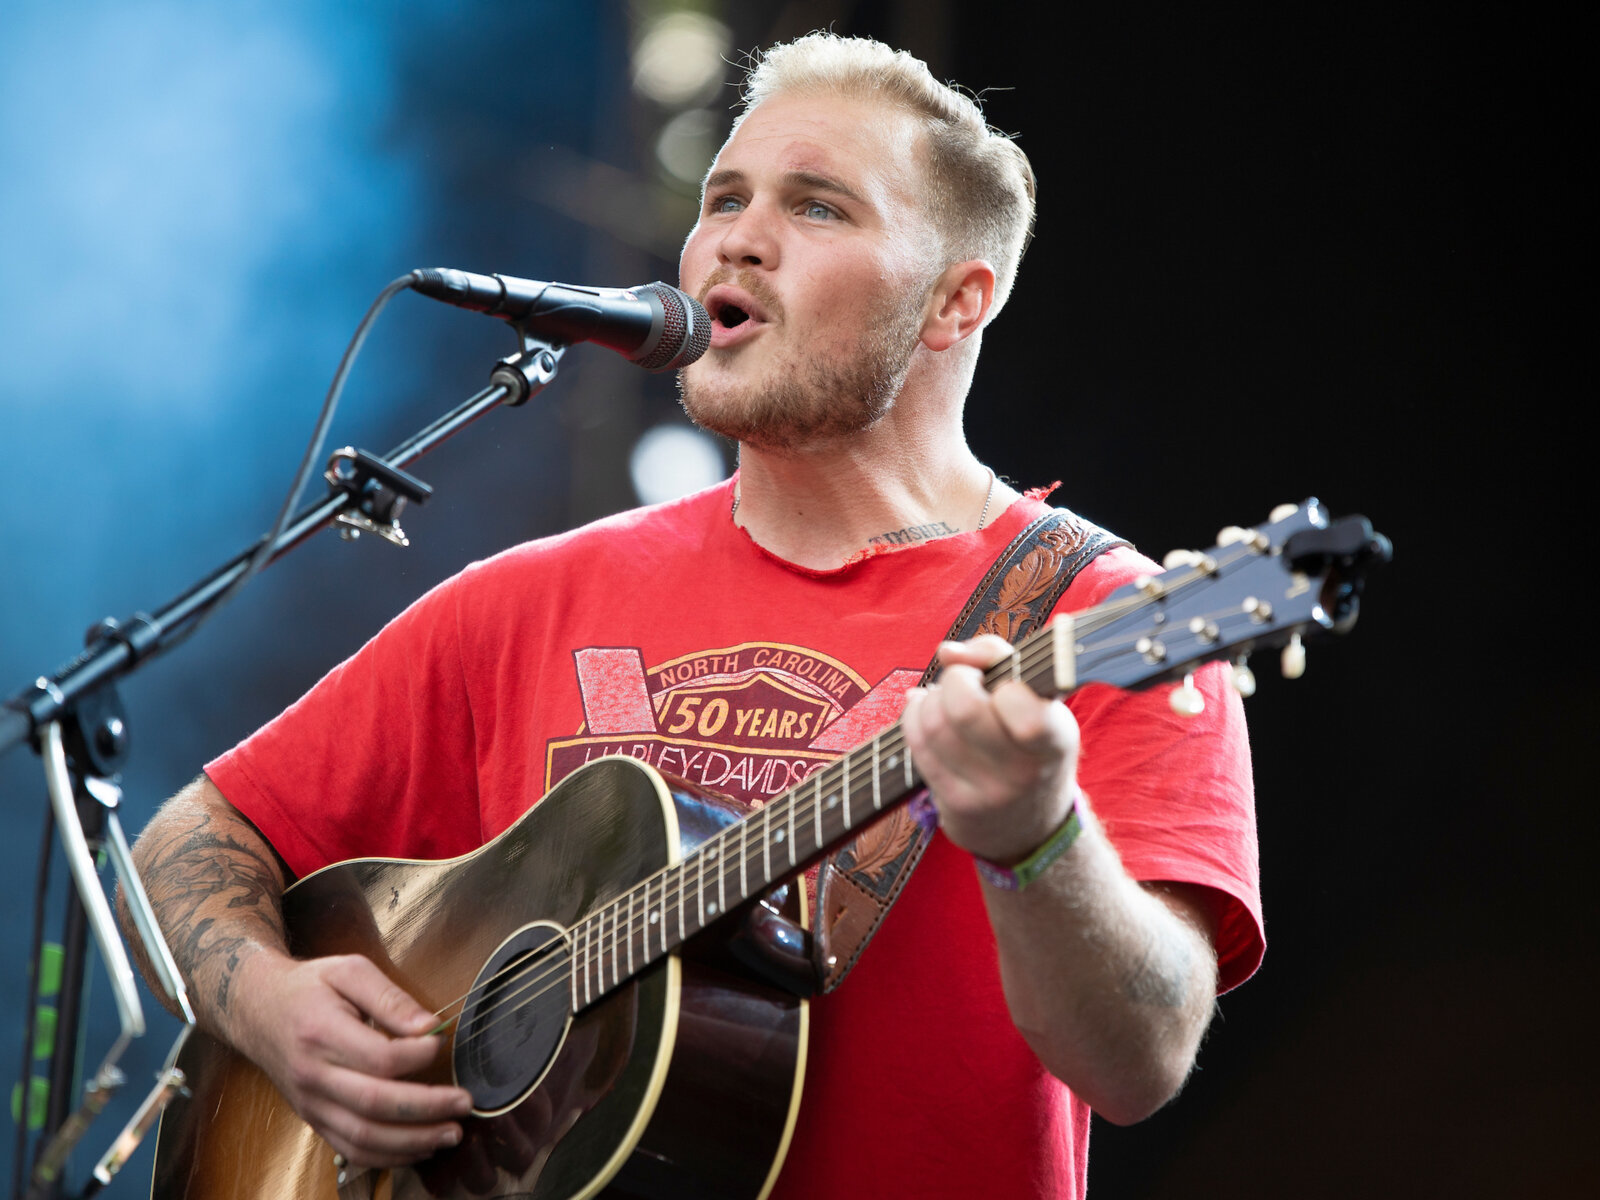 Country star Zach Bryan returns to the Big Gig as 2023 Amp headliner